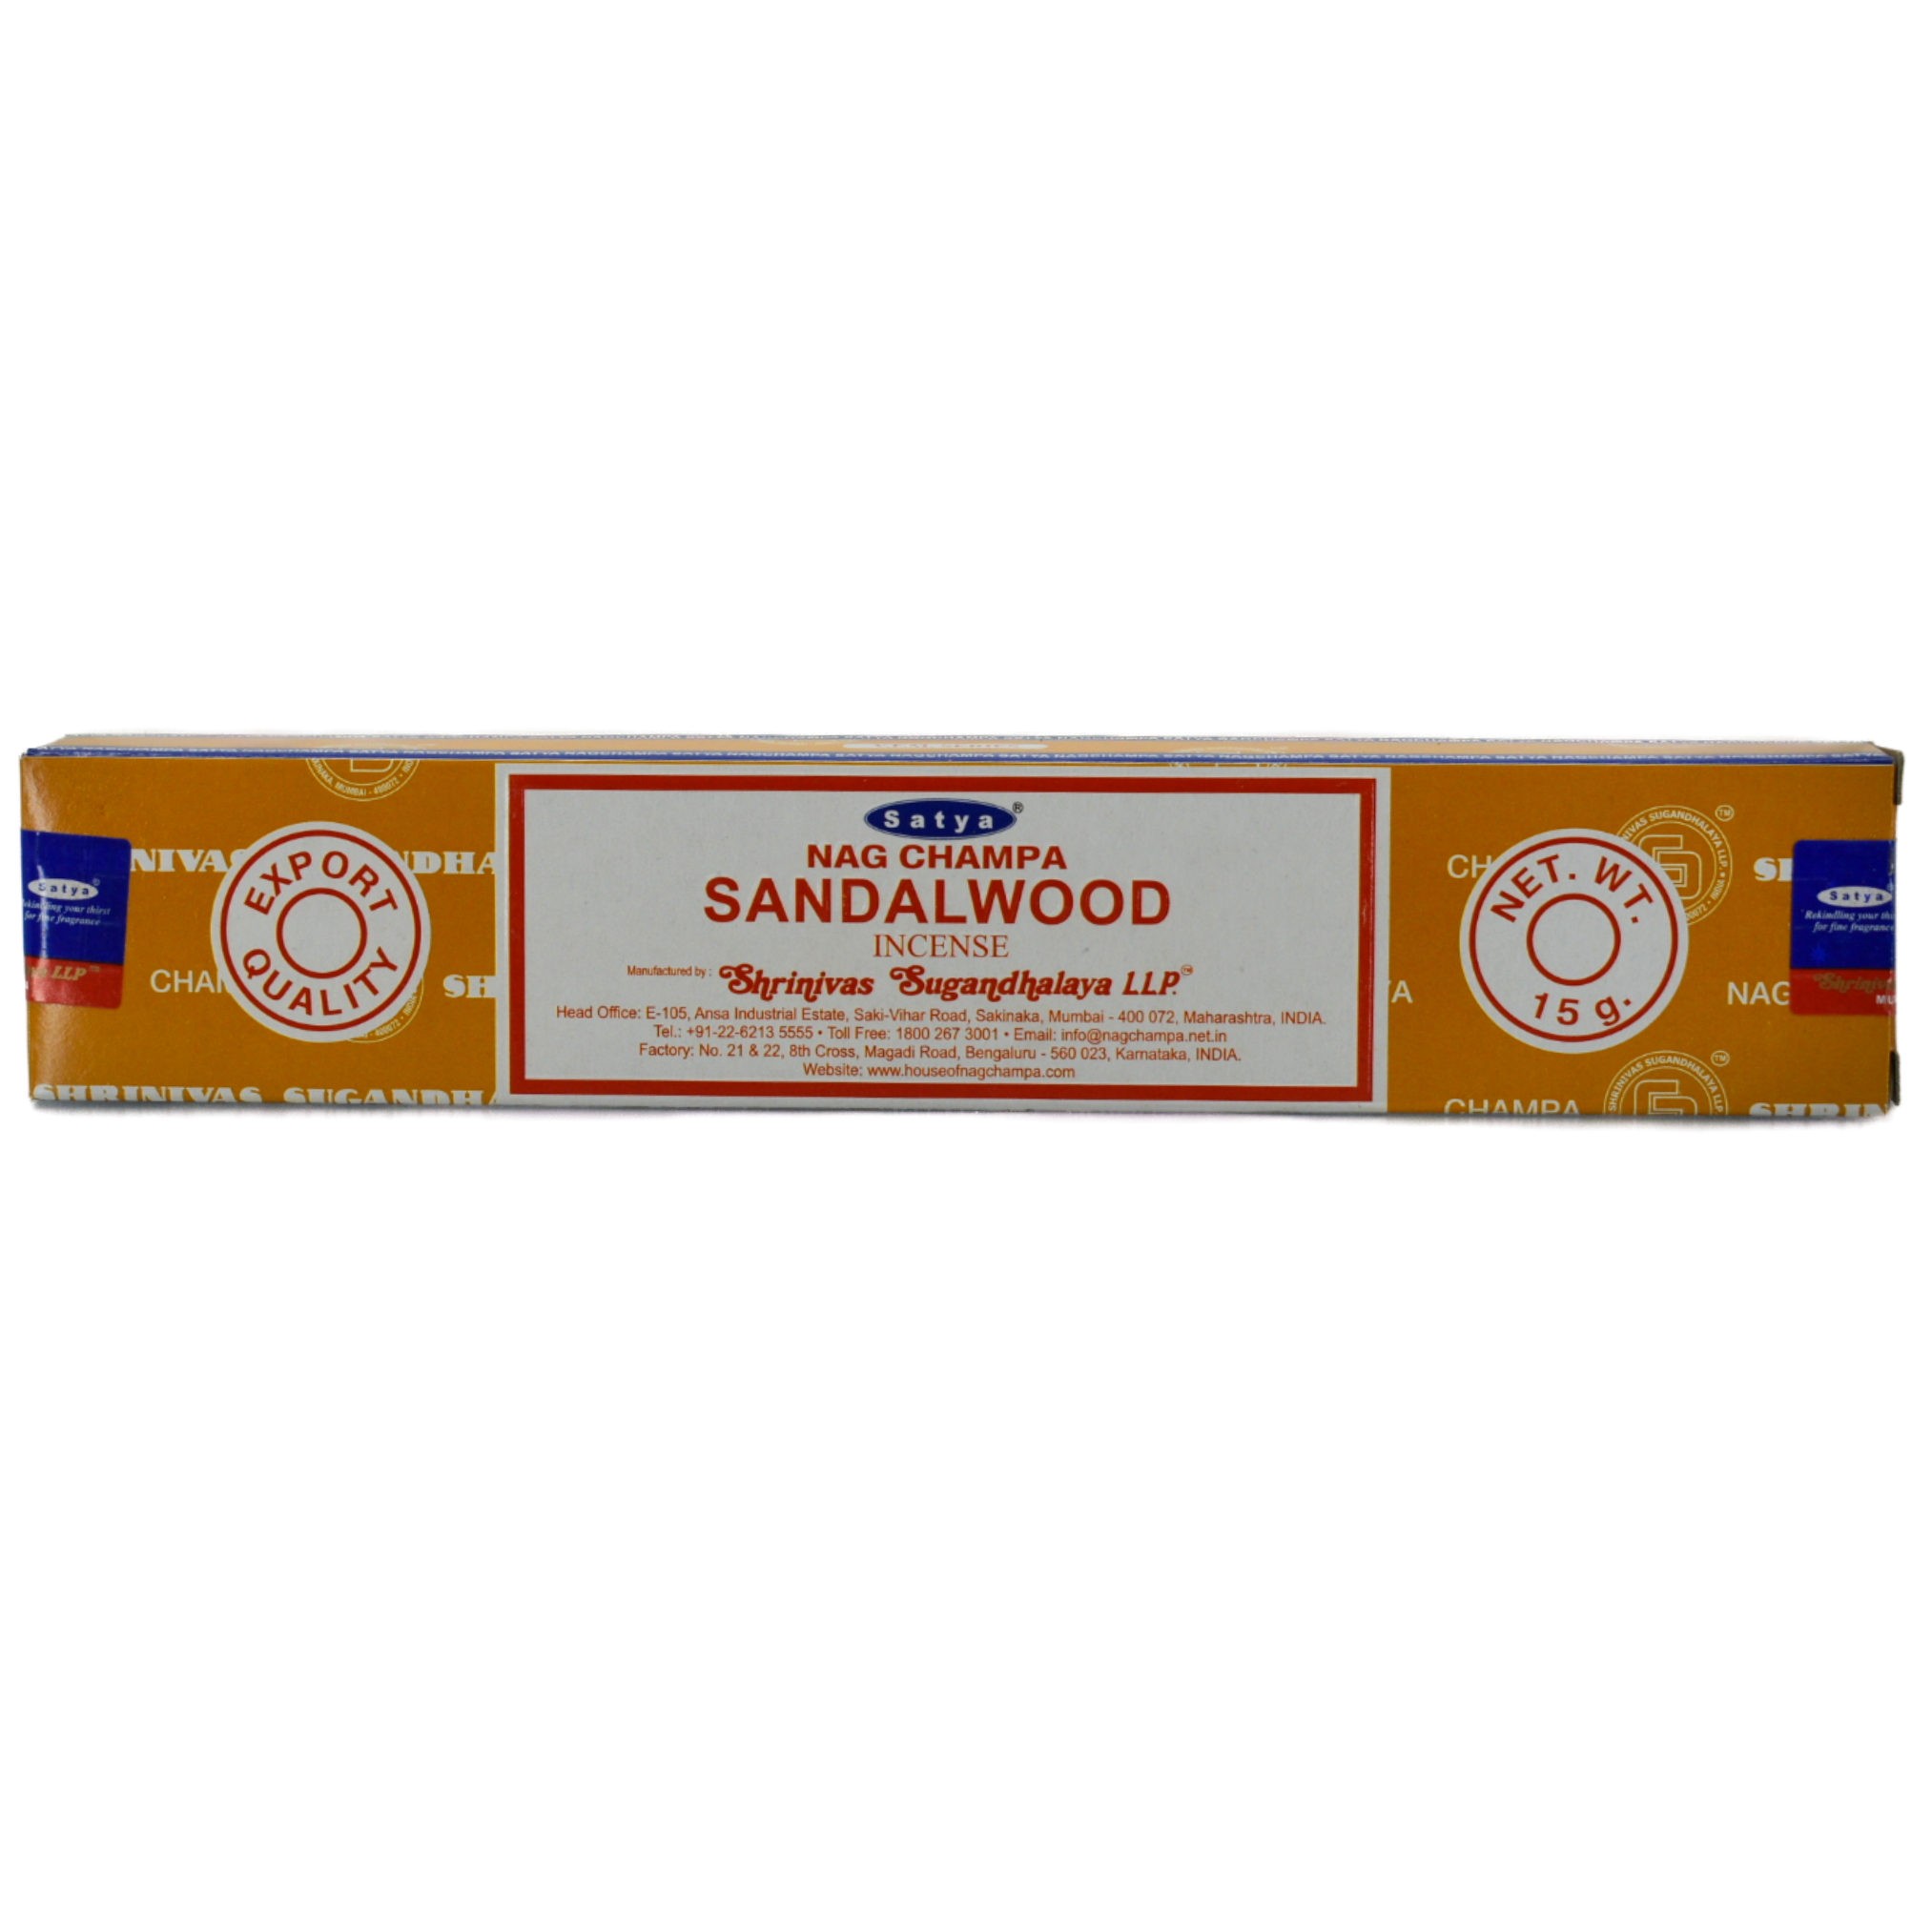 Sandalwood Sayta Incense Sticks.  The box is a burnt orange color with lines through it.  The lines are company words.  In the center there is a white rectangle with a red frame within the border.  The top half of the box lists the company and title: Sayta Nag Champa Sandalwood Incense.  The wording below is the manufacturer's information.  On both sides of the rectangle is a circle.  The left circle says Export Quality and the other circle says Net. Weight 15 grams.